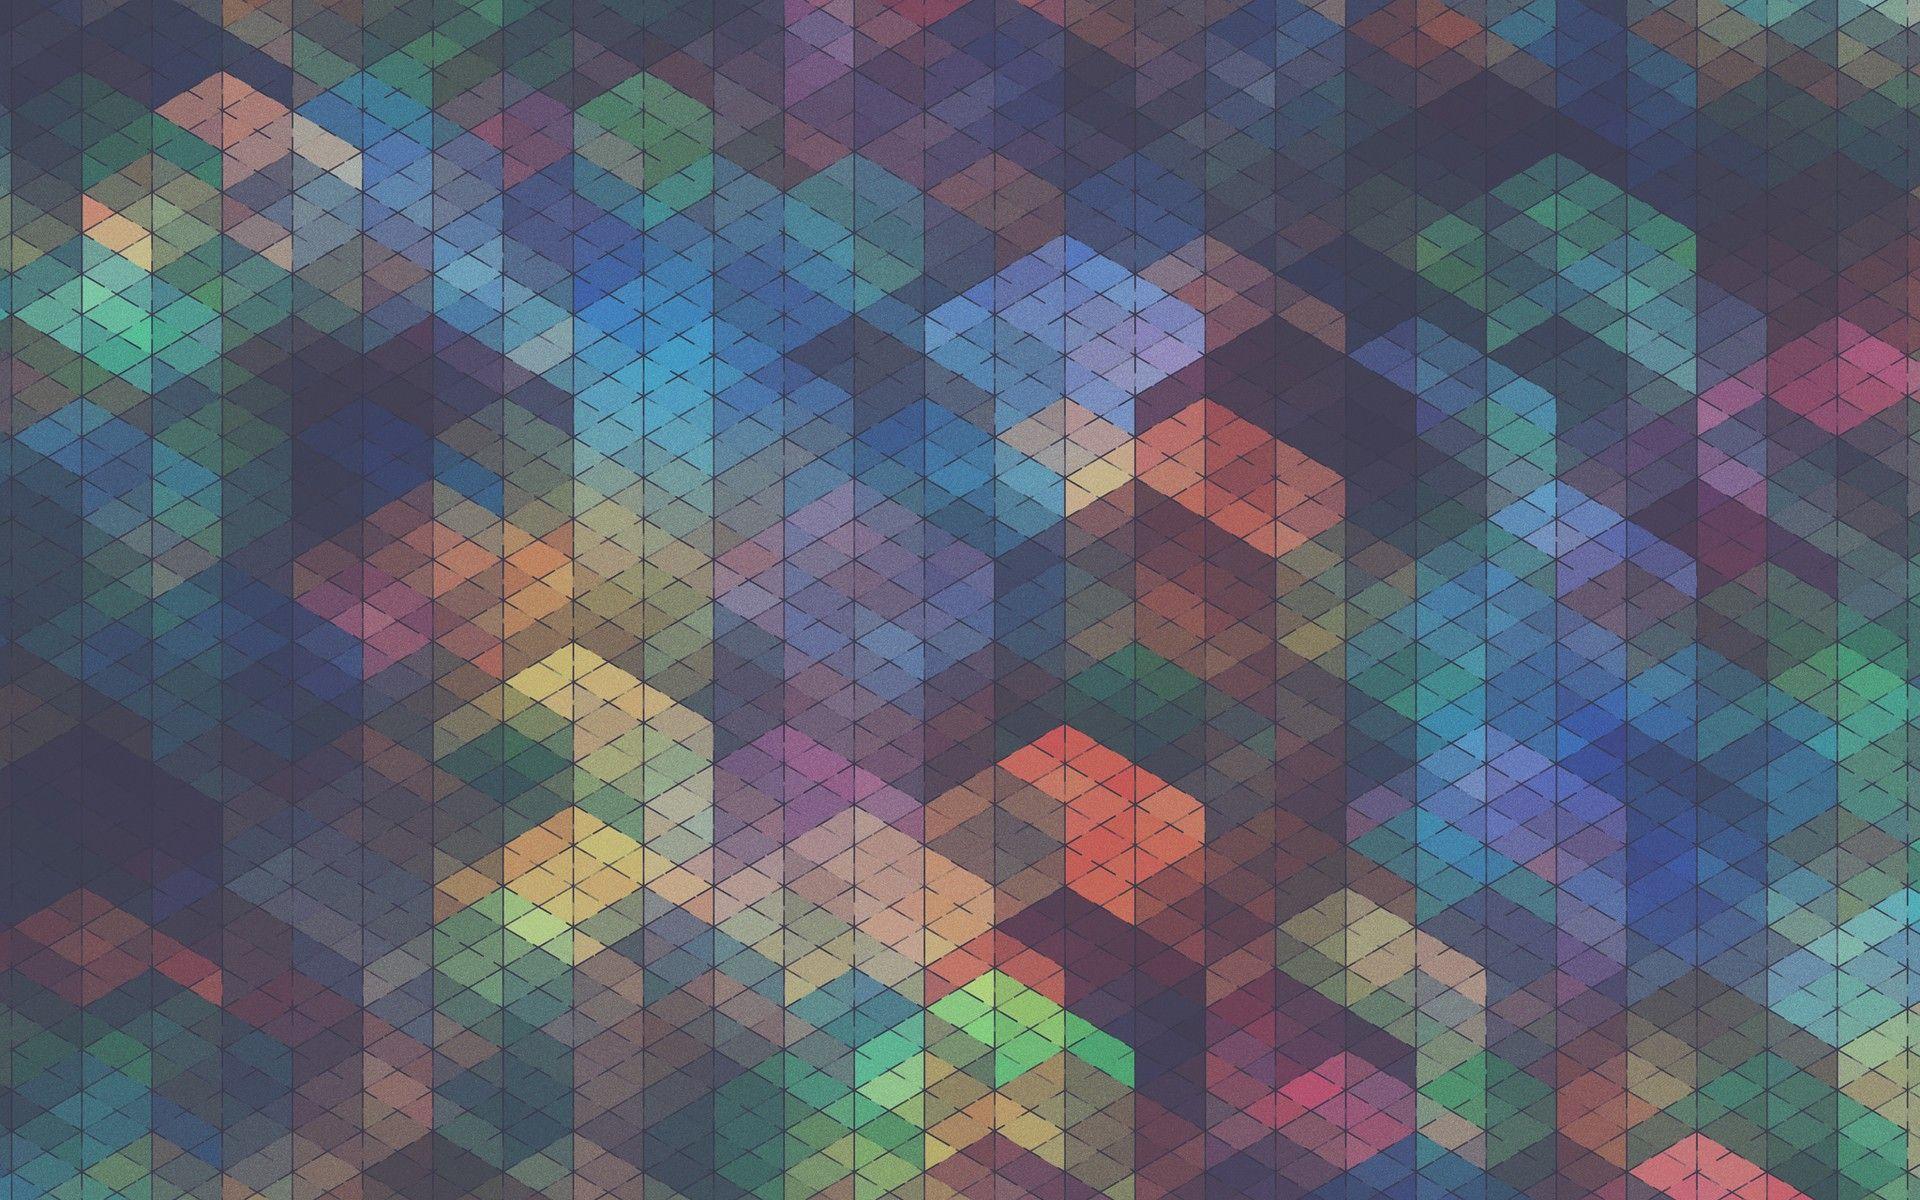 Download the Colorful Cubism Wallpaper, Colorful Cubism iPhone